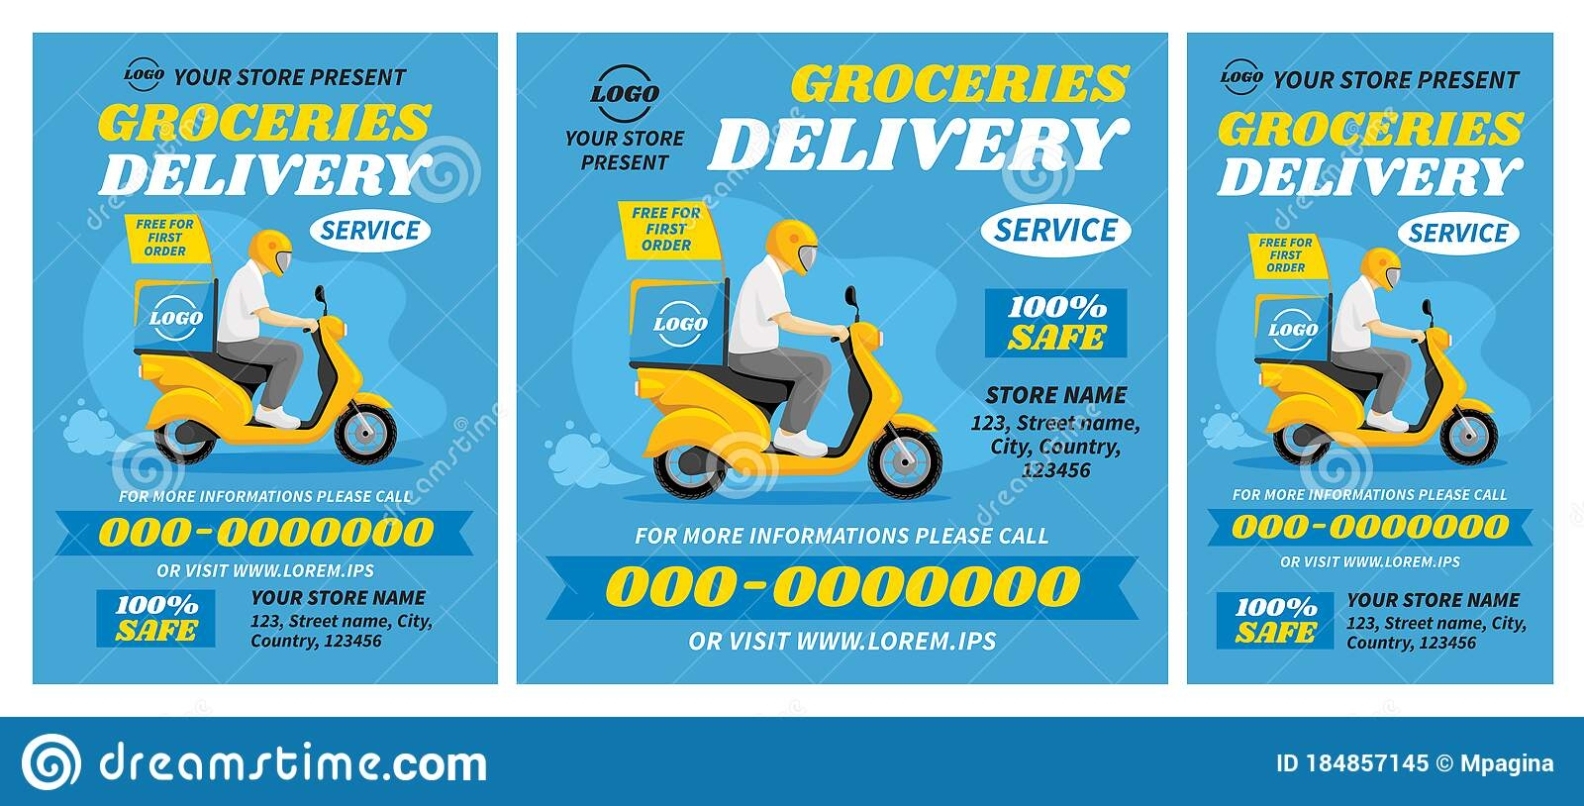 Delivery Flyer Template In Delivery Flyer Template